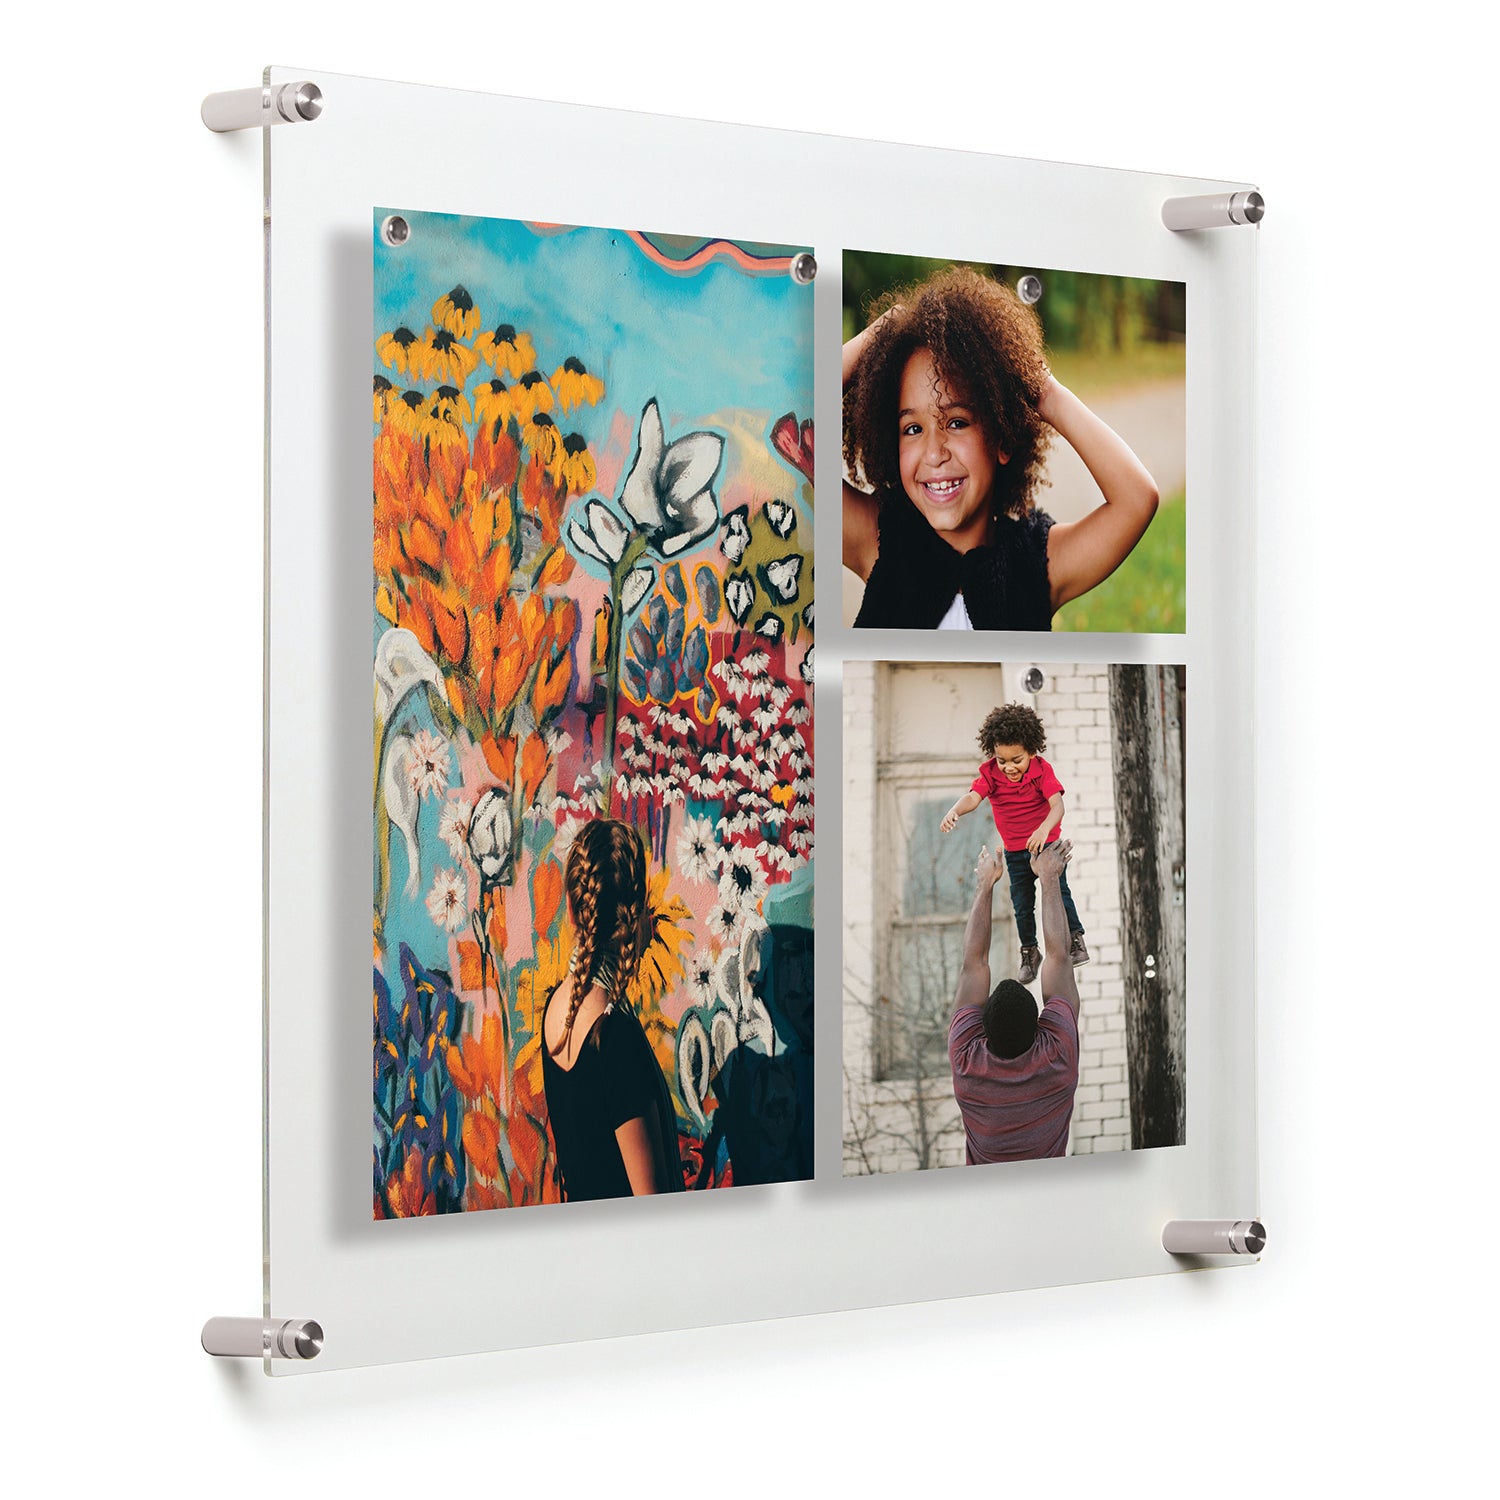 Framed Canvas UPCHARGE for Size 12x16. This Option belongs to the